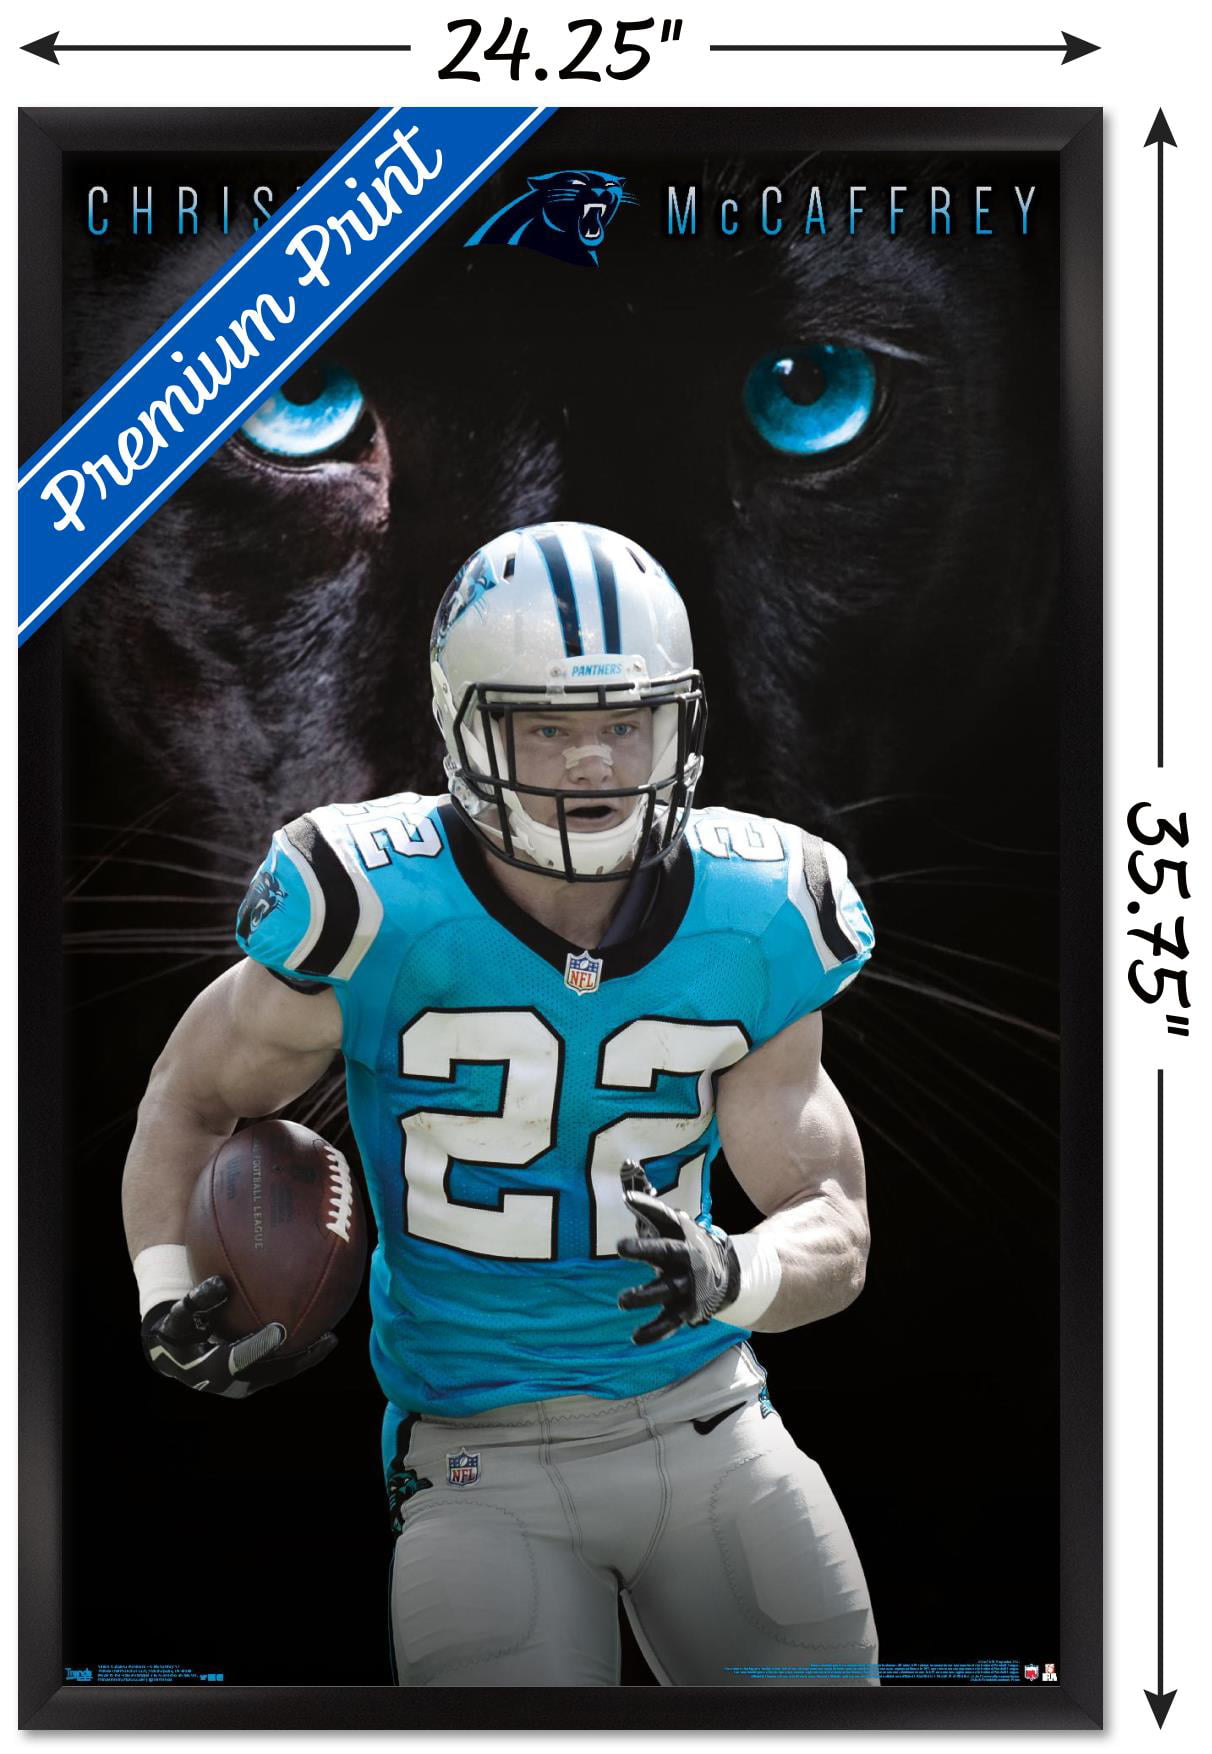 Trends International Wall Poster End Zone 17 Carolina Panthers Prints 24.25 x 35.75 